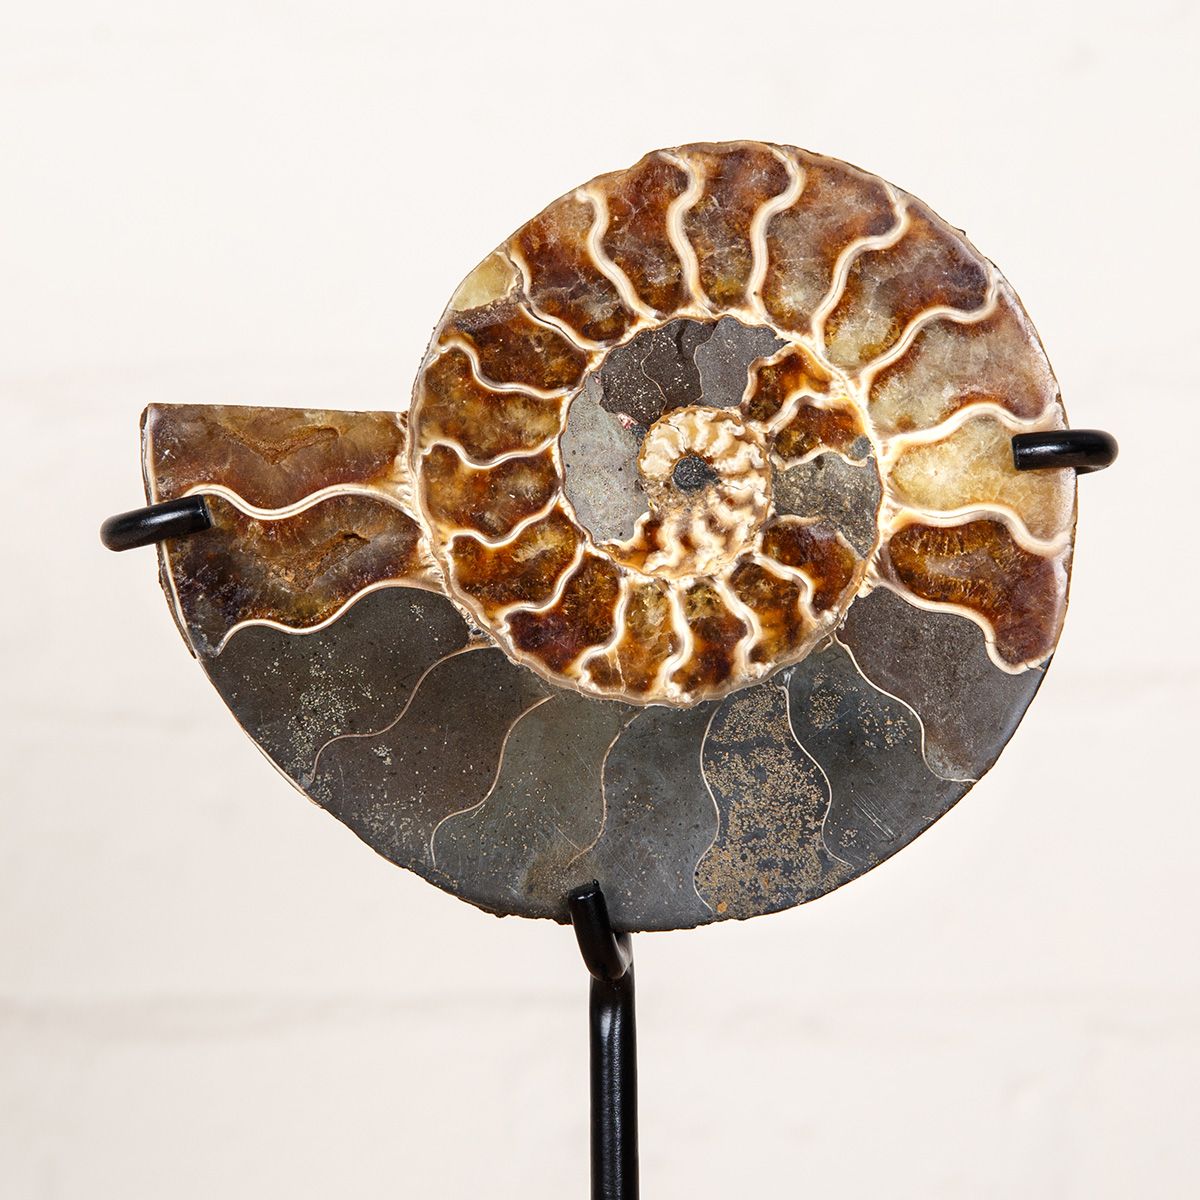 6.2 inch Polished & Sliced Ammonite Fossil on Stand (Cleoniceras sp)